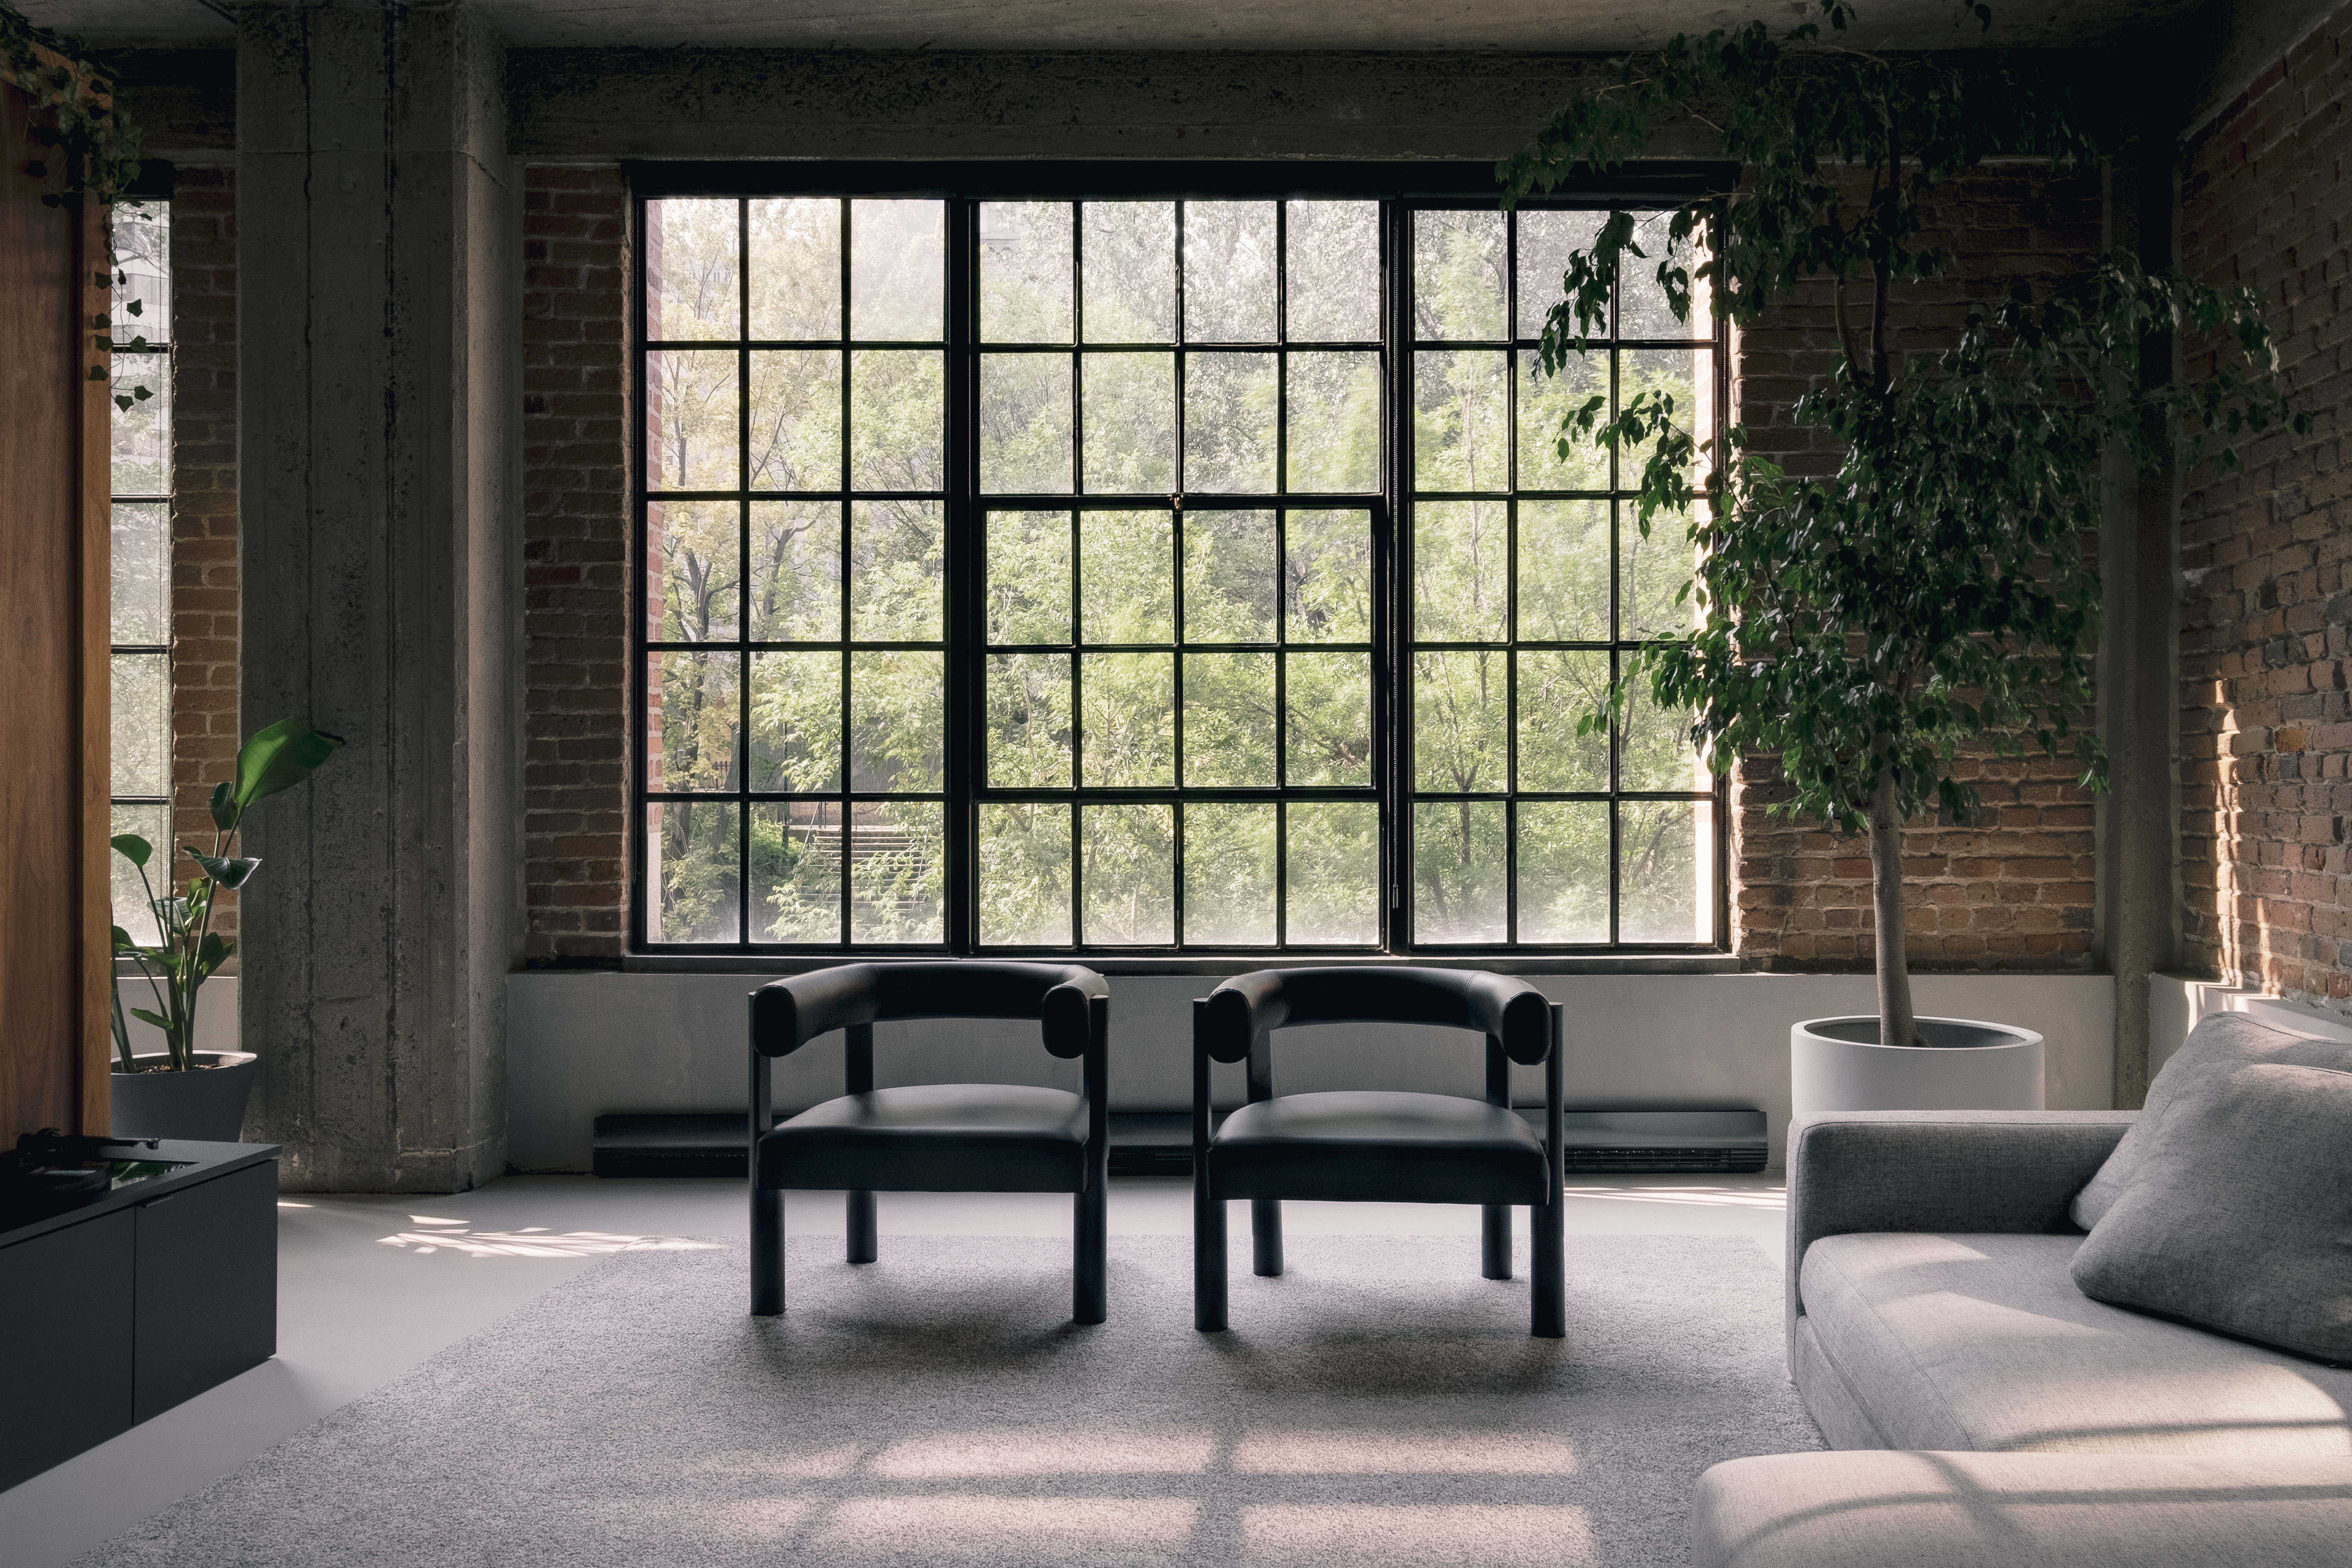 two cove chairs set against a multi-pane window in an industrial loft